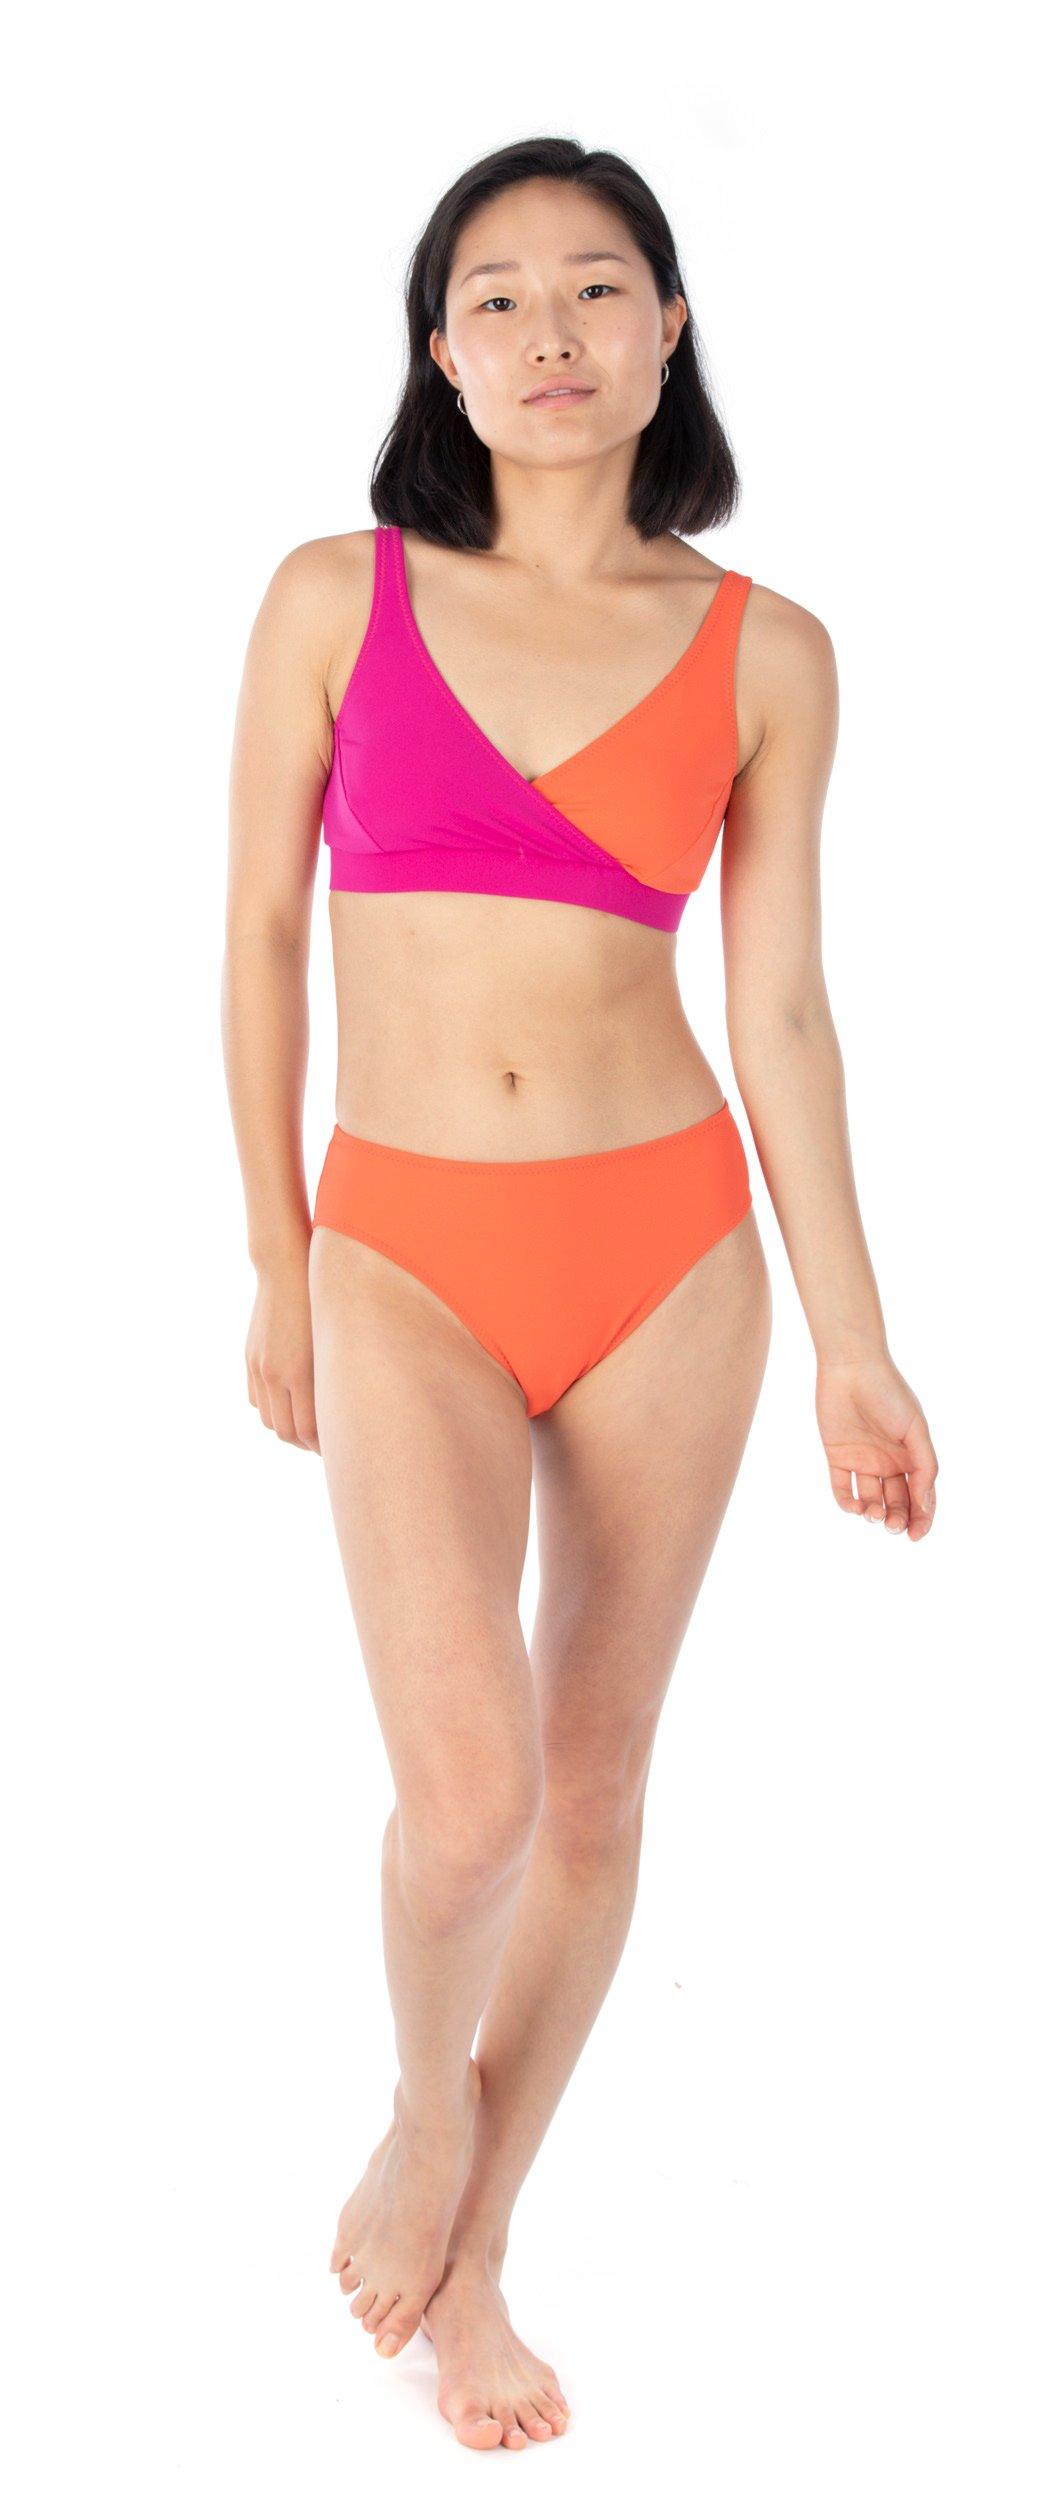 Have fun with color blocking when you make you own bikini with this Jalie pattern. Fun and modern look and a great way to use your fabric remnants.